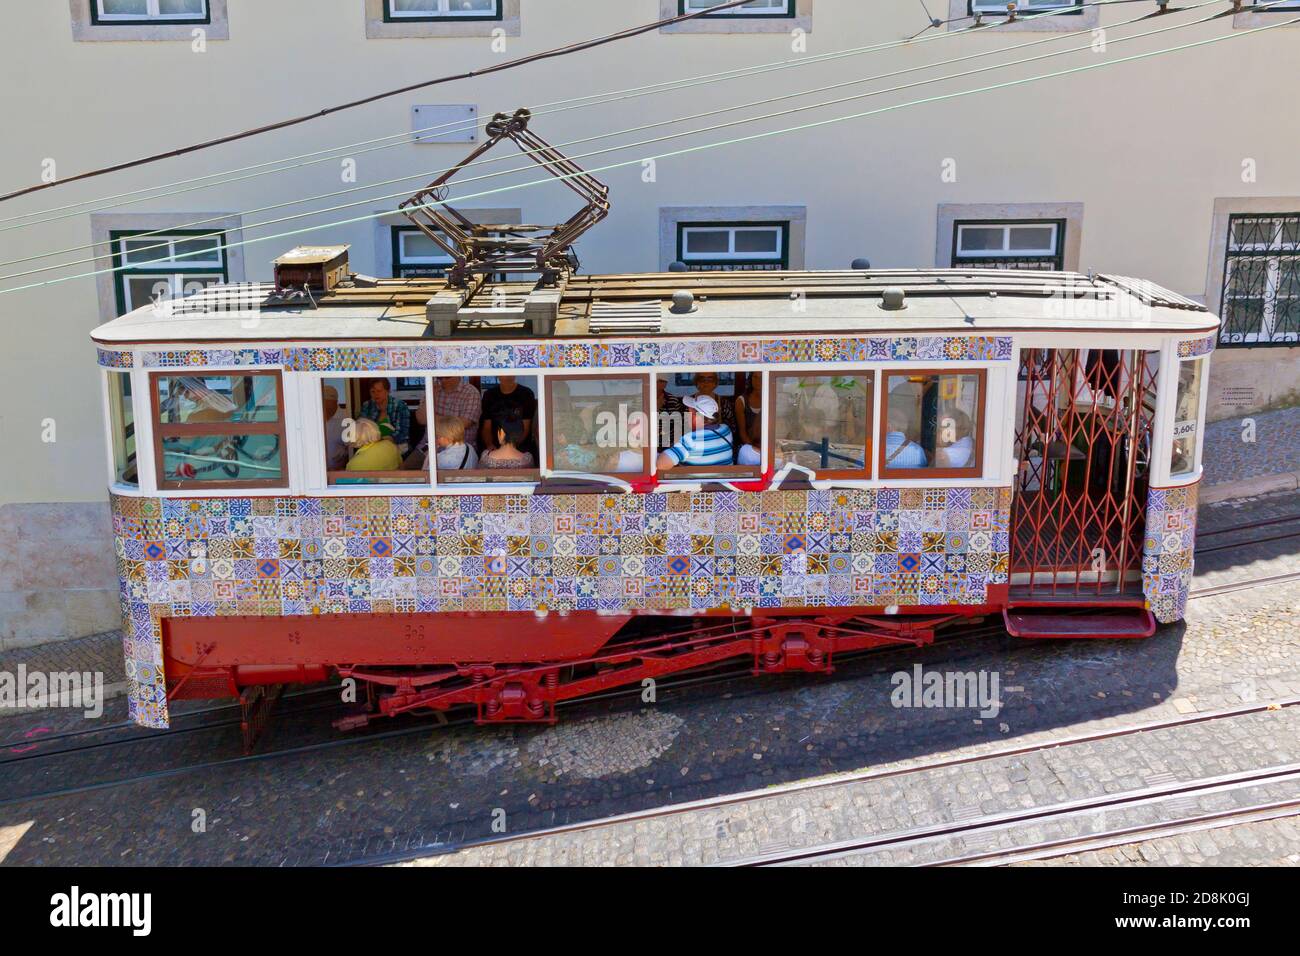 Lisbon, Portugal - June 13, 2013: Carriage of Gloria Funicular decorated with Azulejos tiles in Pombaline downtown of Portuguese capital Lisbon Stock Photo